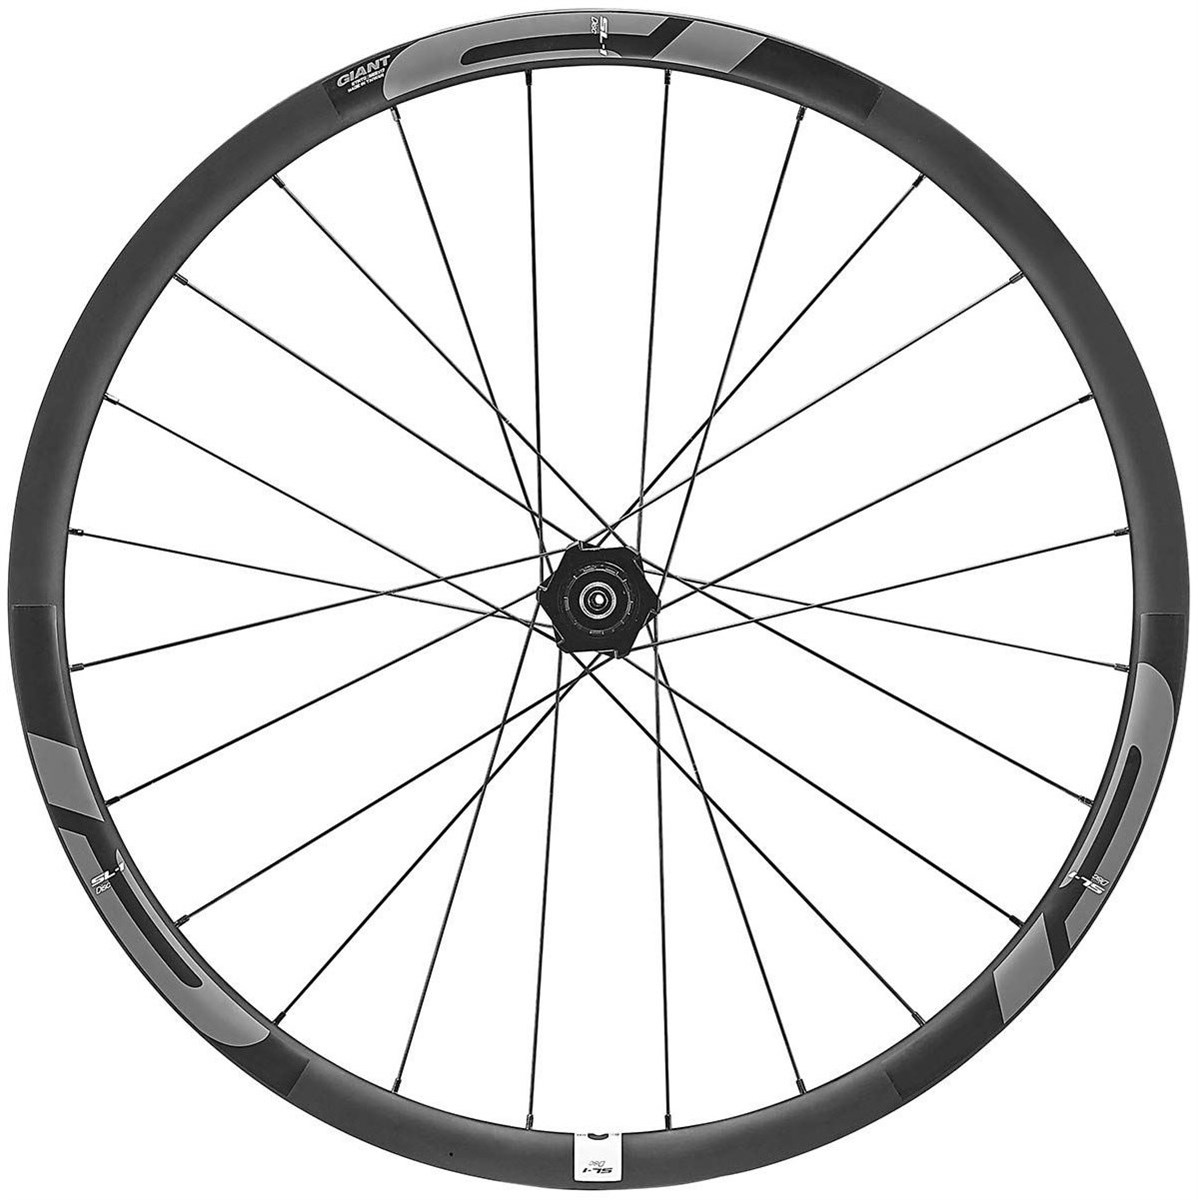 Giant SL 1 Disc Road Rear Wheel product image